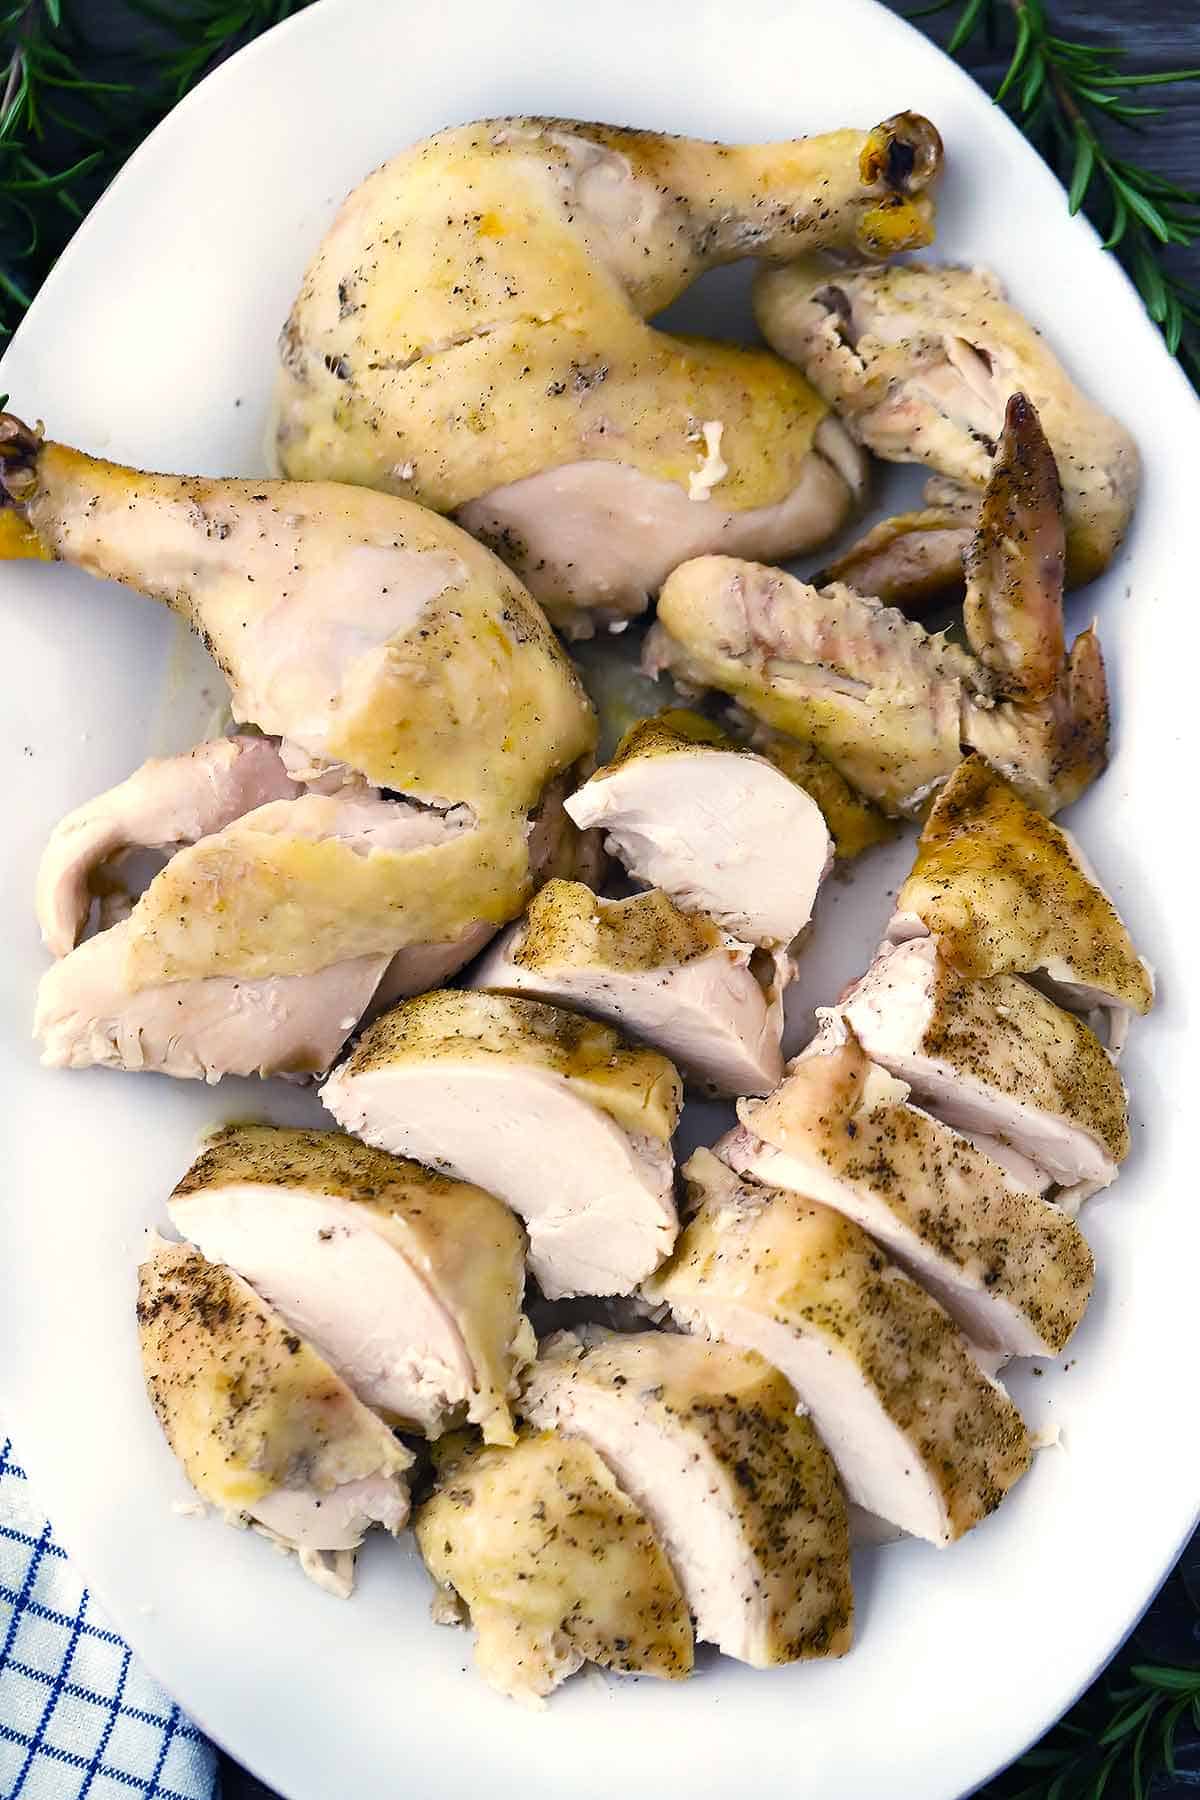 A platter of a cooked cut up and carved whole chicken